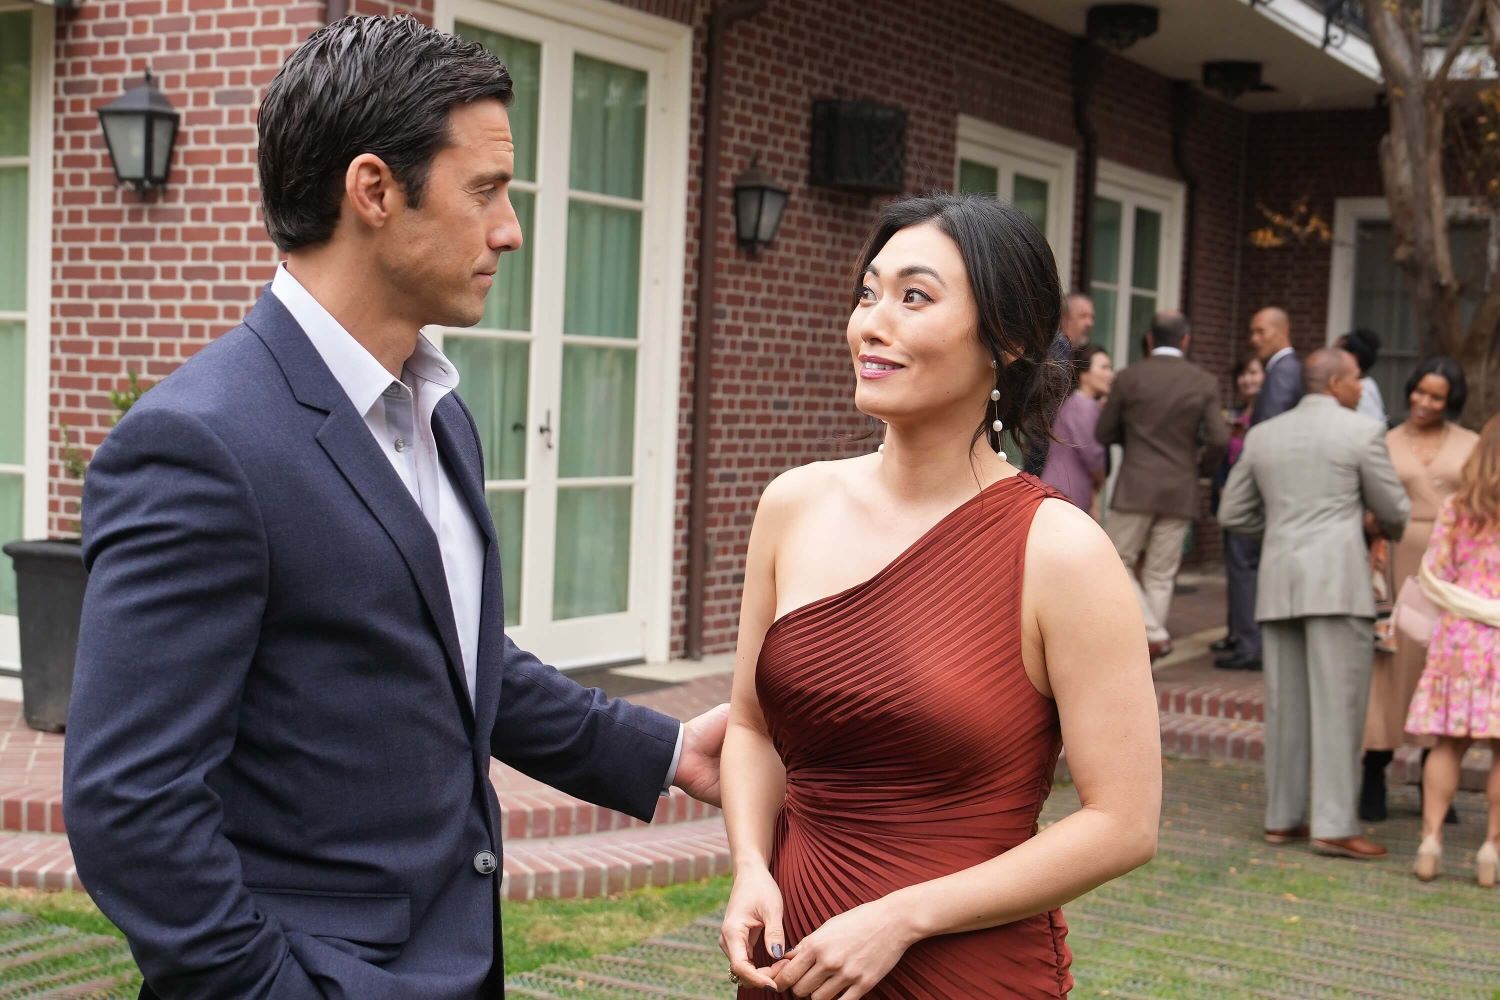 Milo Ventimiglia as Charlie and Catherine Haena Kim as Emma in 'The Company You Keep' Episode 4, which doesn't air tonight, March 12.